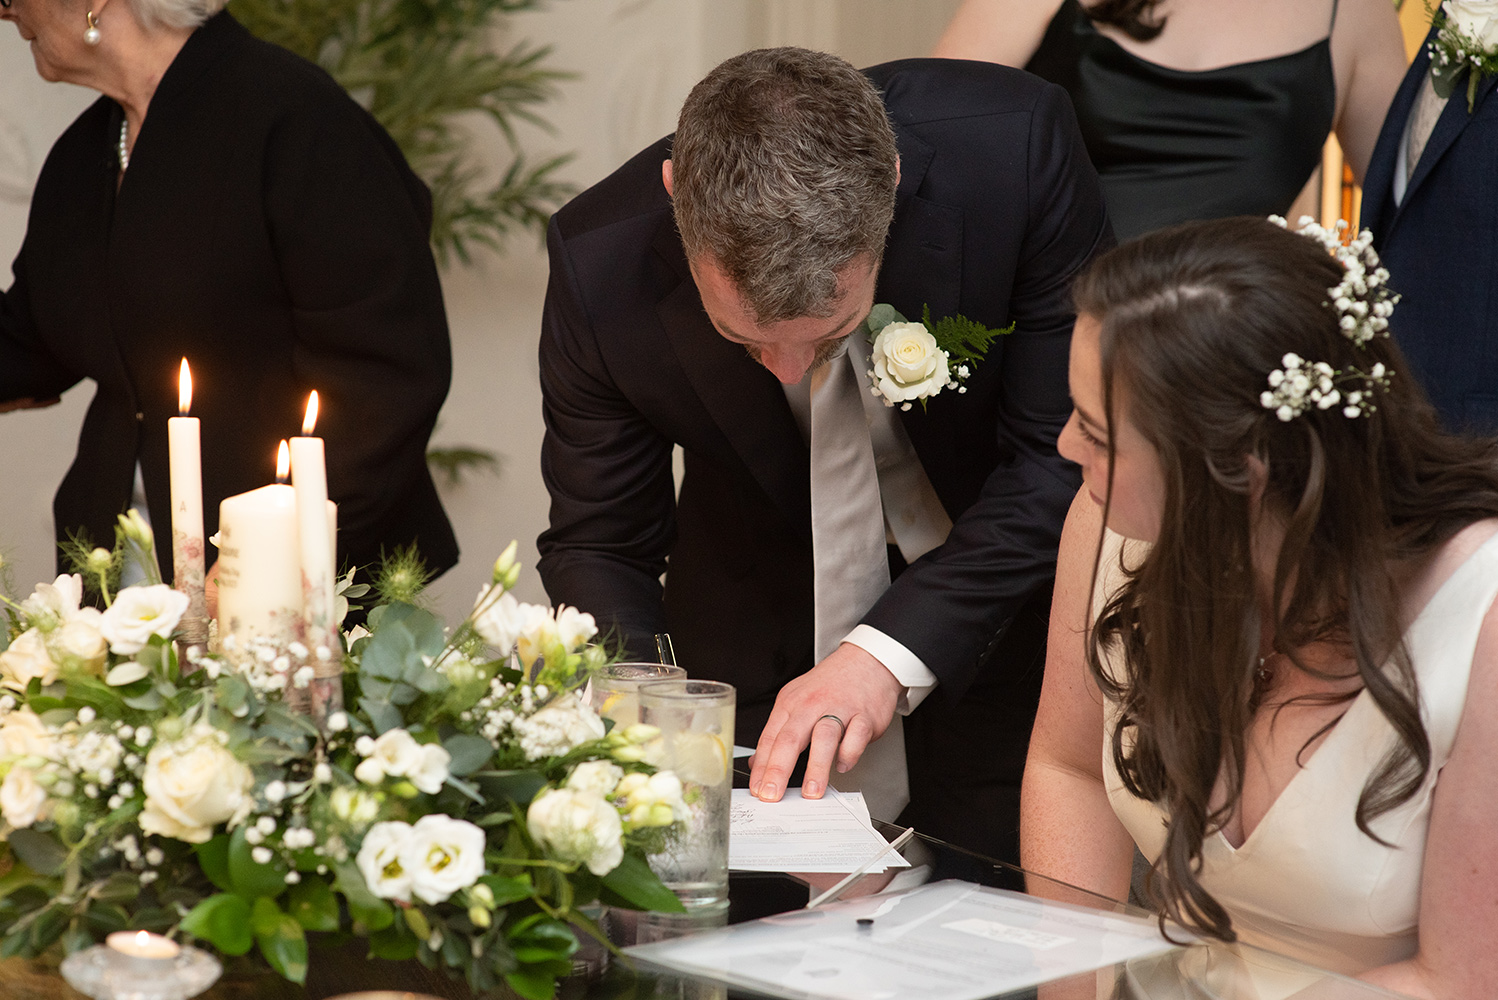 sigining the registry at wedding ceremony in Rathsallagh House